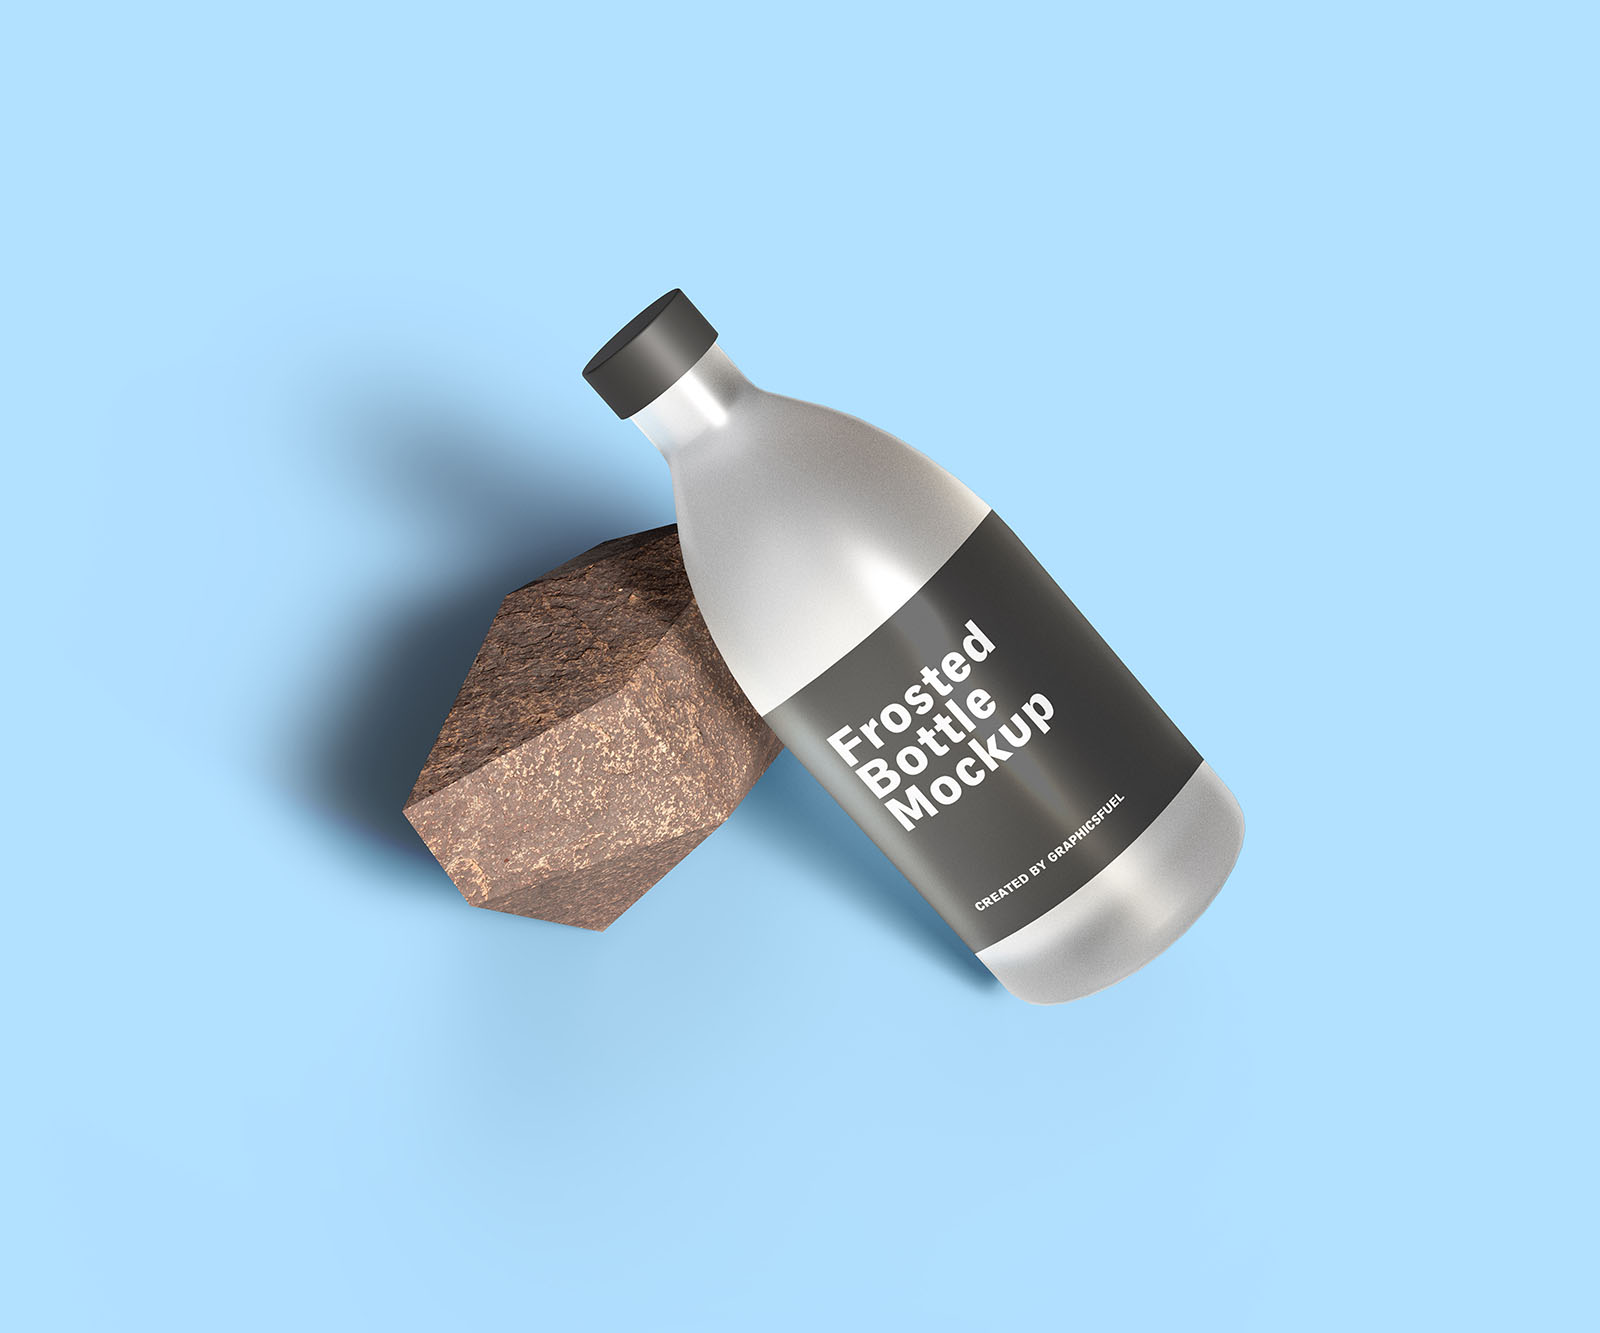 Frosted Bottle Mockup PSD Templates